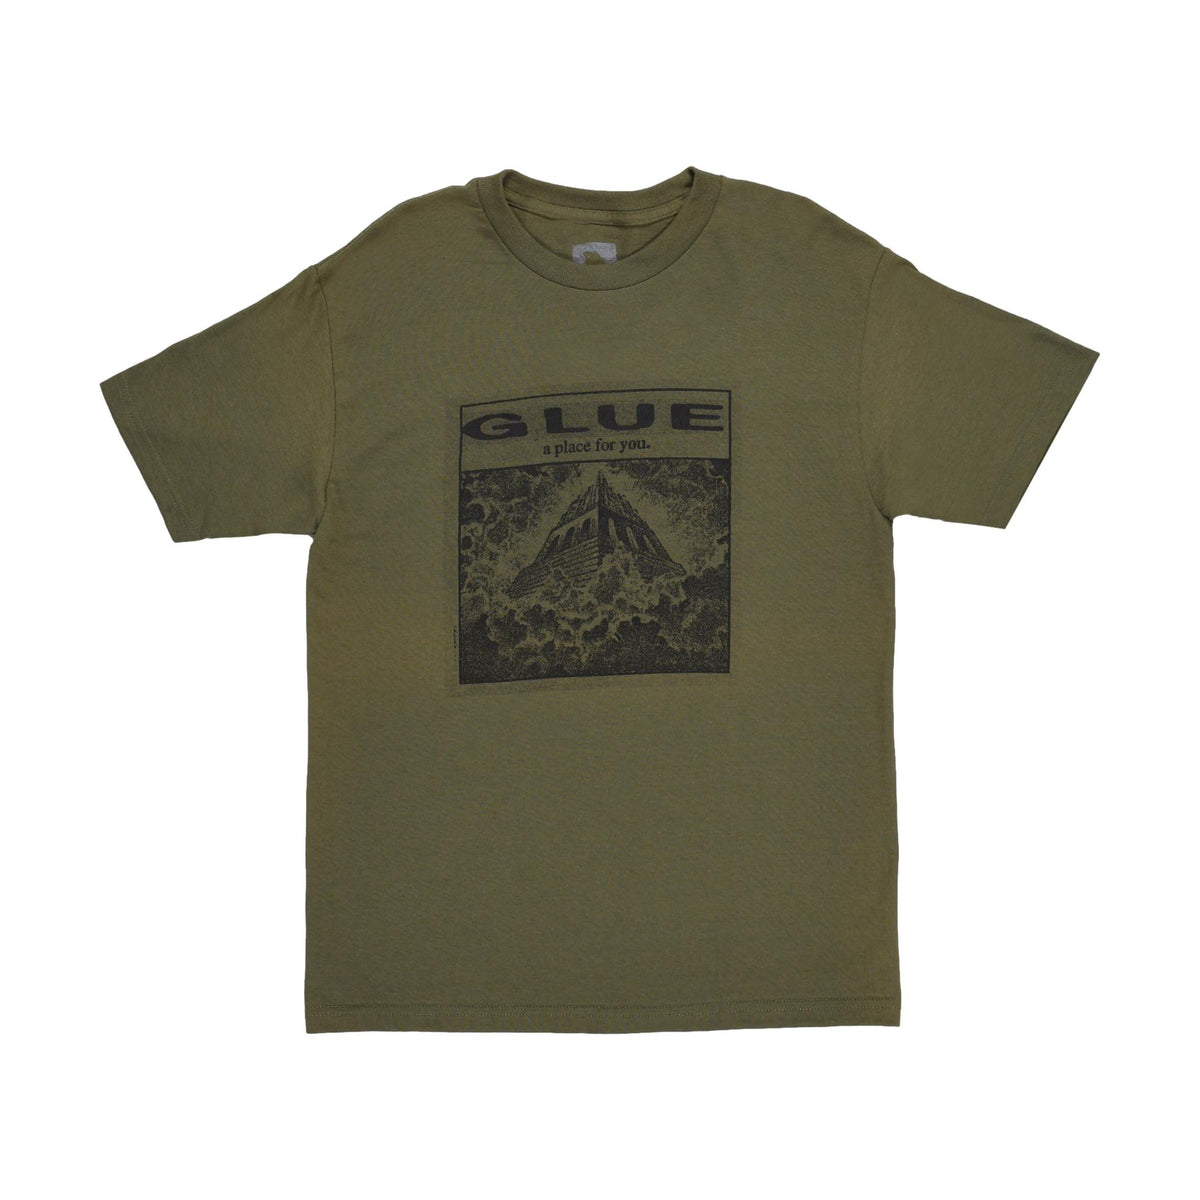 Glue A Place For You T-Shirt Military Green - Venue Skateboards